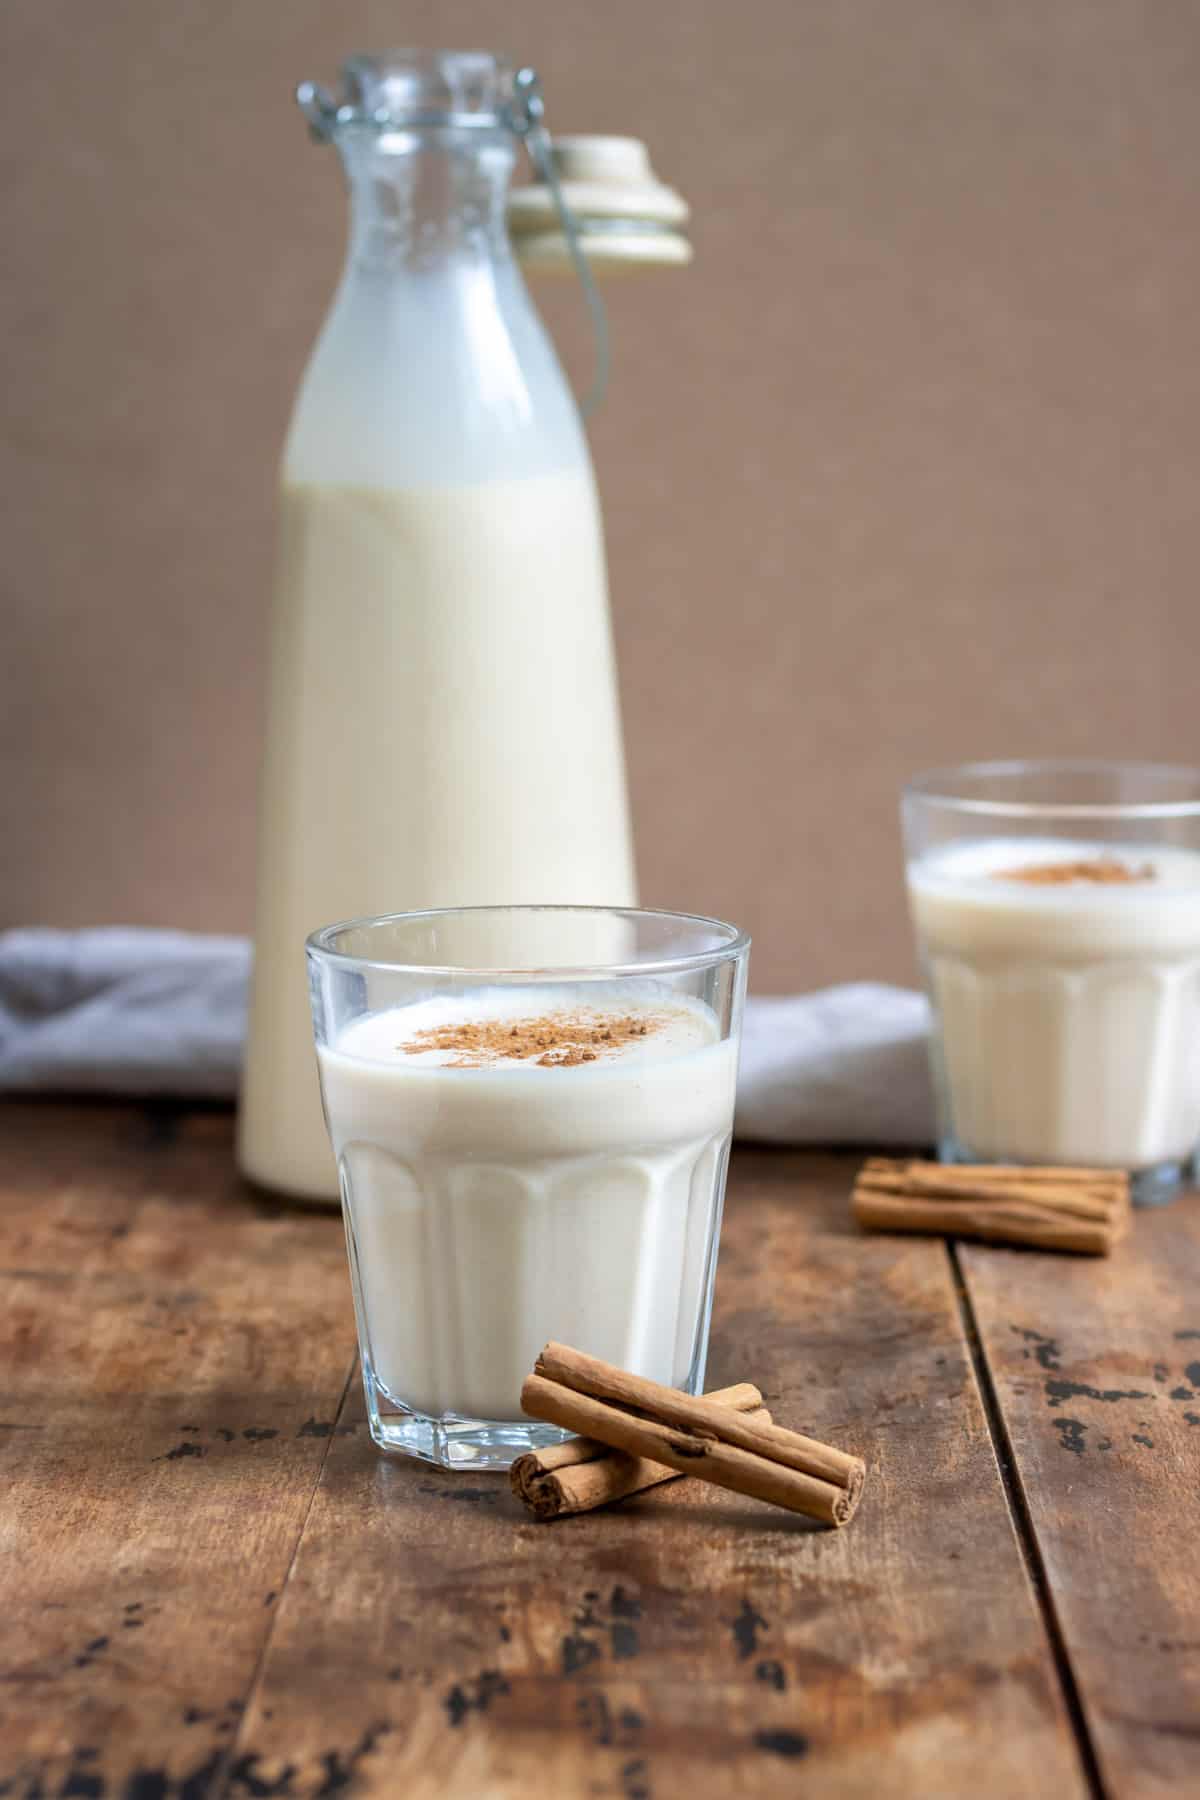 Glasses of coquito in front of a bottle of it.